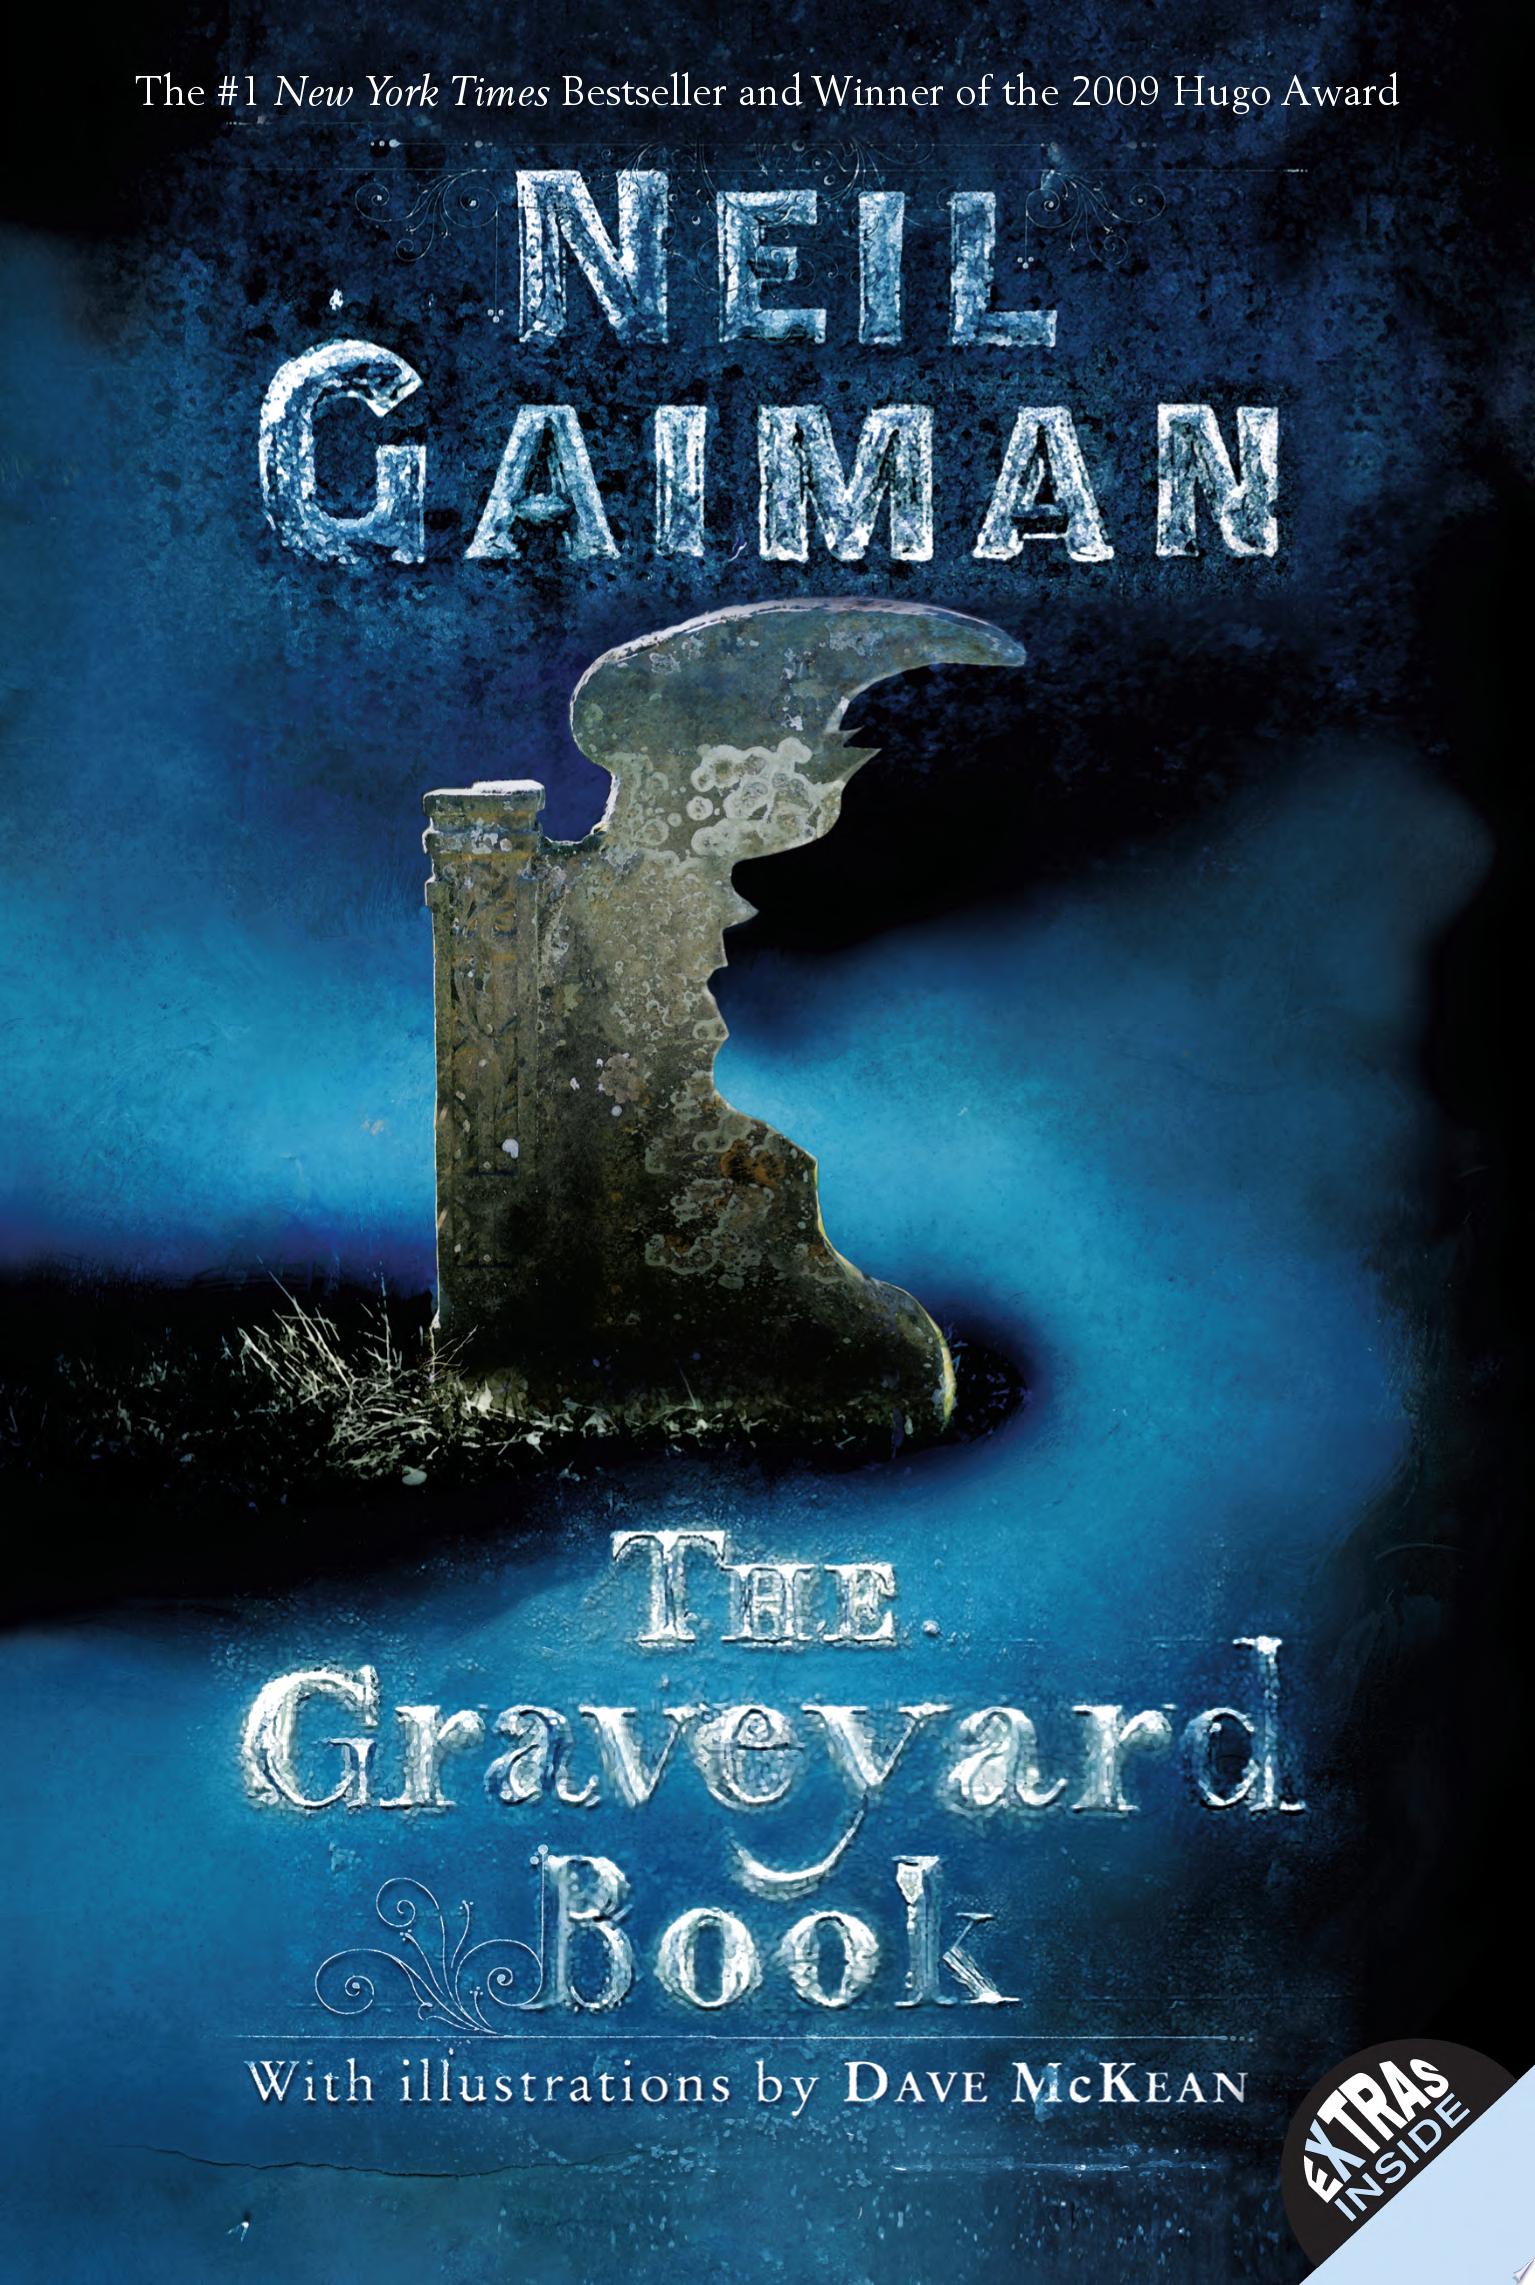 Image for "The Graveyard Book"